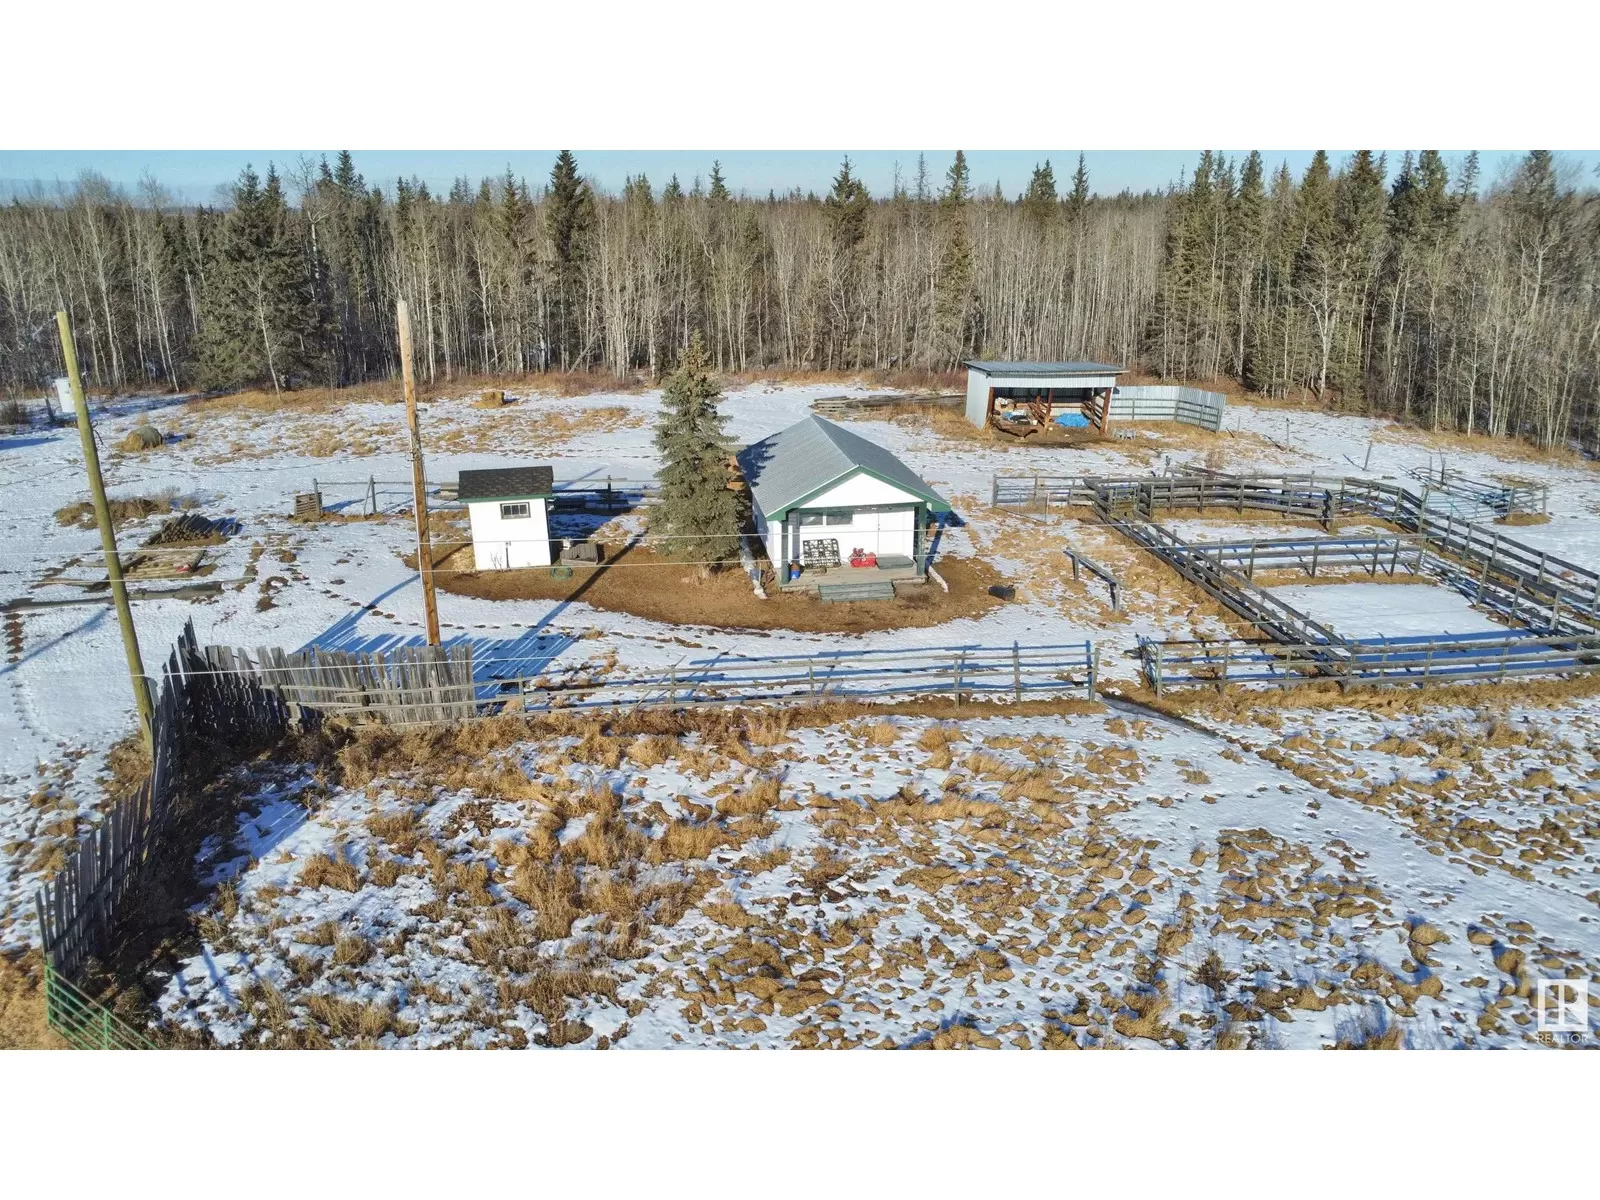 No Building for rent: Twsp 555 Range Road 13, Rural Lac Ste. Anne County, Alberta T0E 1V0